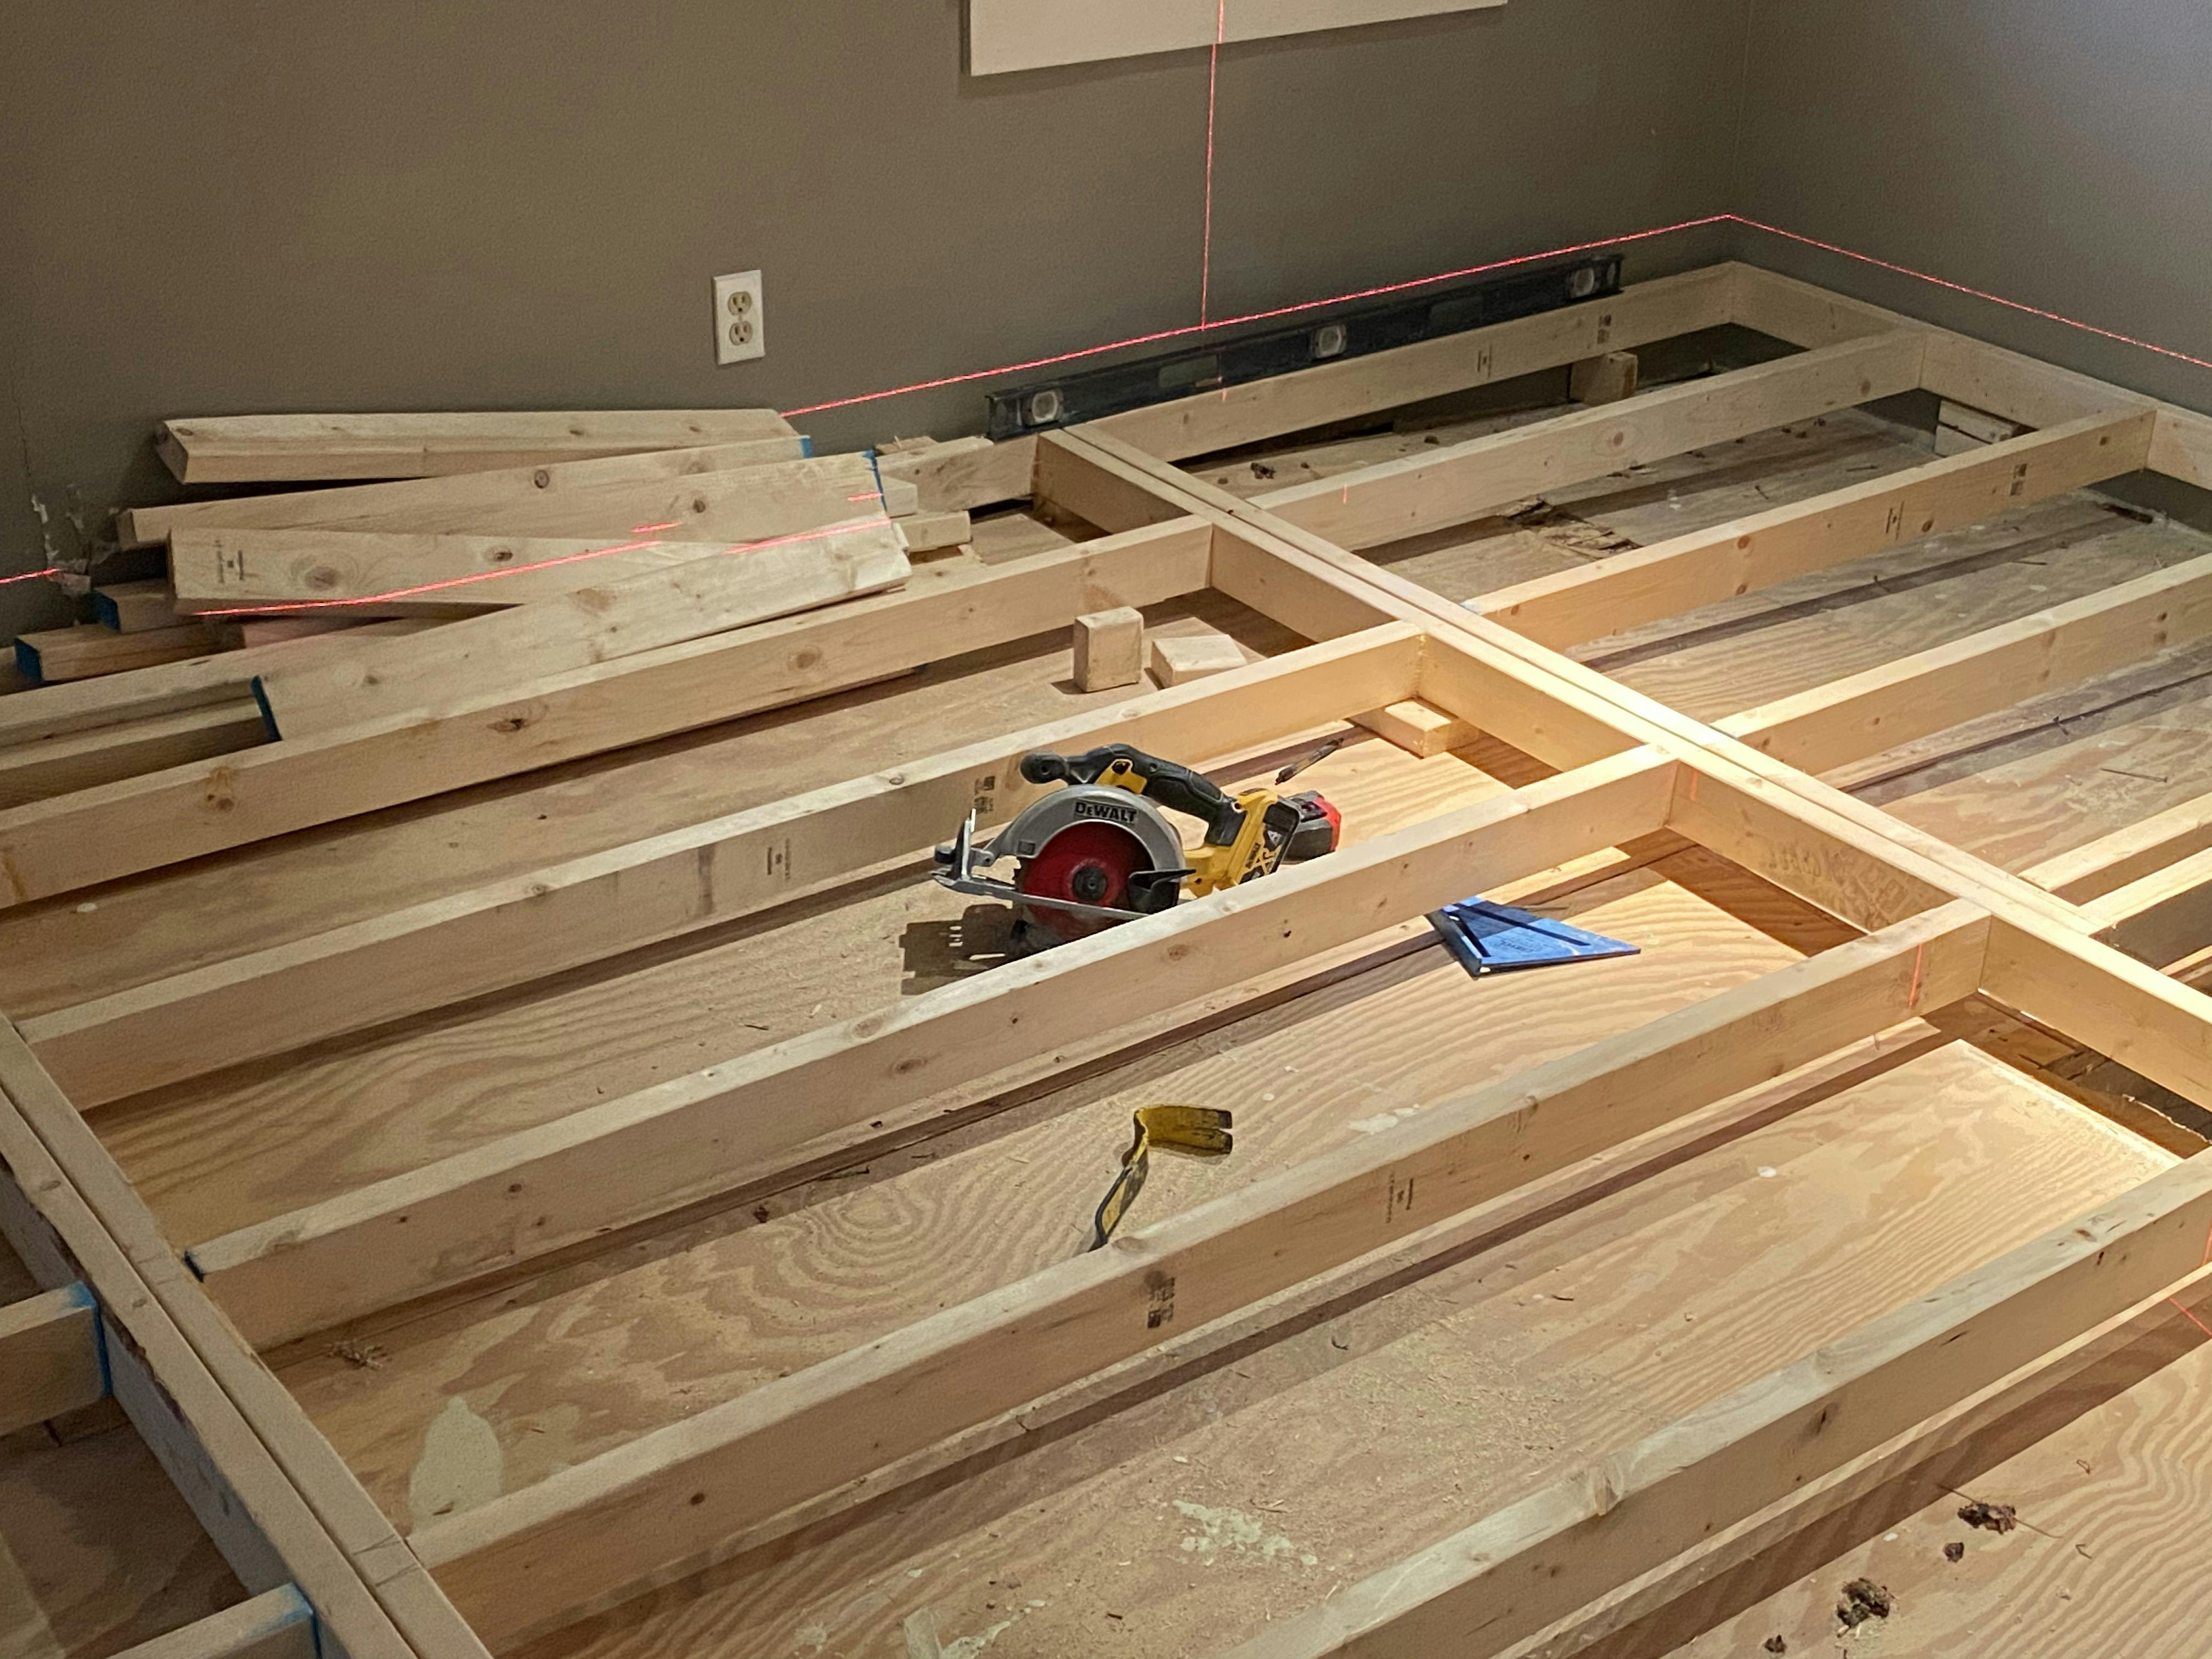 How to level a floor by sistering wood joists